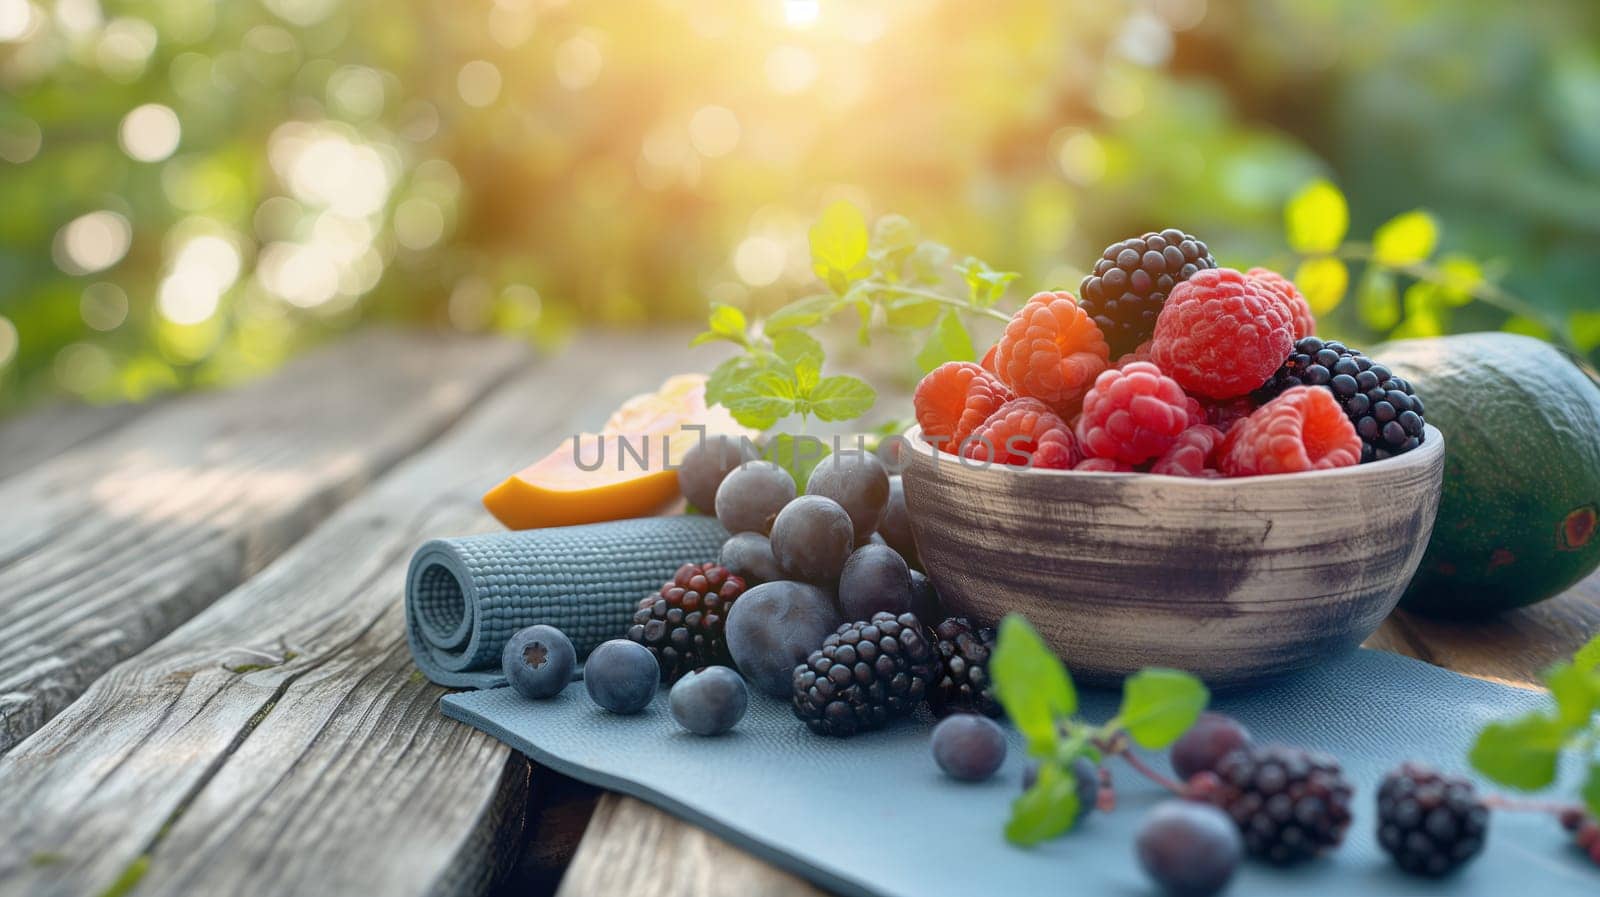 A bowl of fresh berries sits on a yoga mat amidst lush greenery, bathed in the warm glow of the morning sun, suggesting a healthy start to the day - Generative AI